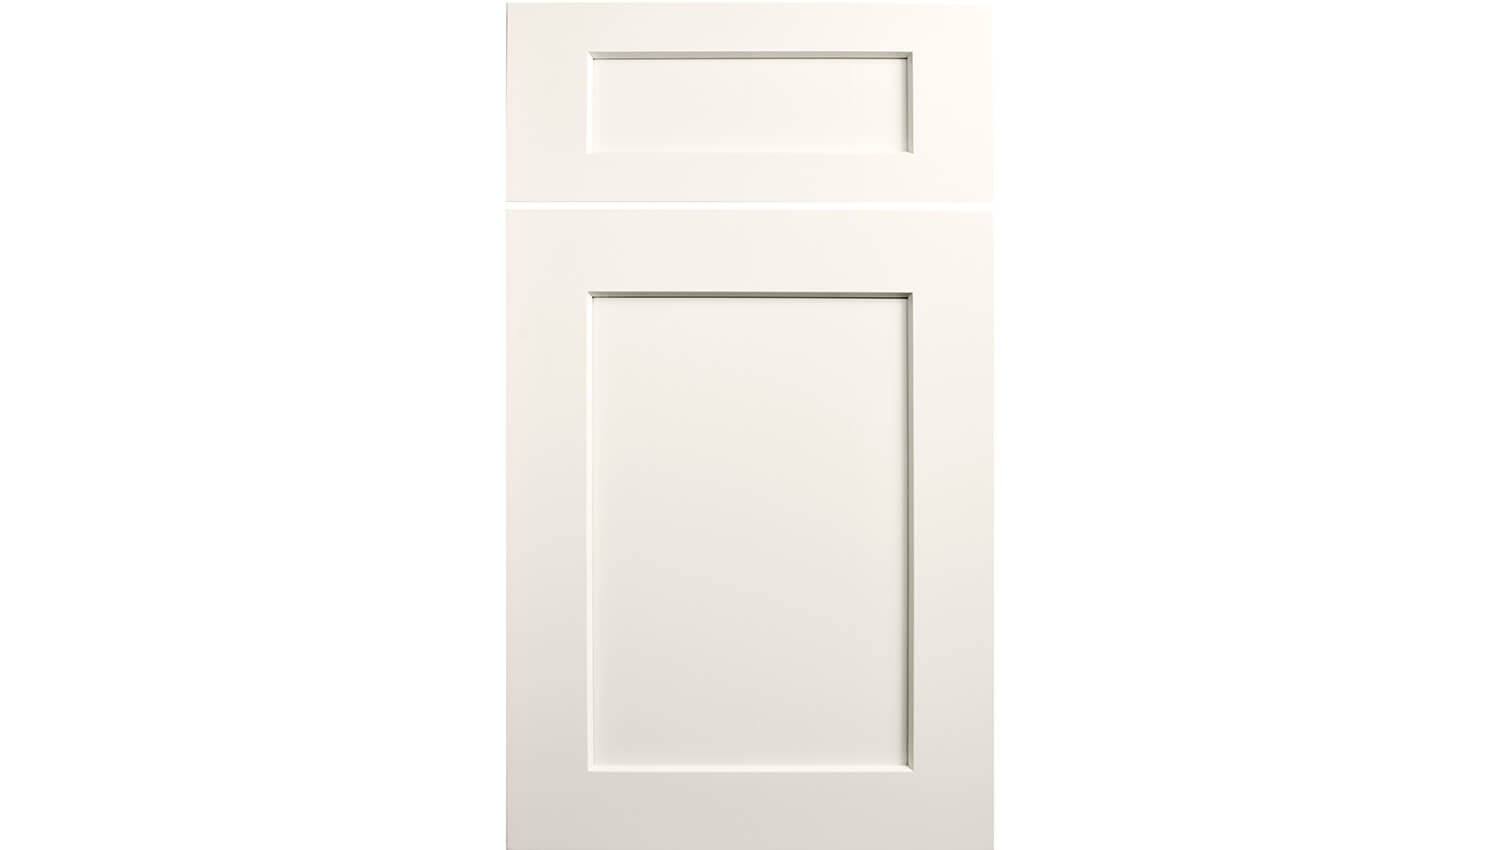 A white painted shaker door style from Dura Supreme called Carson.